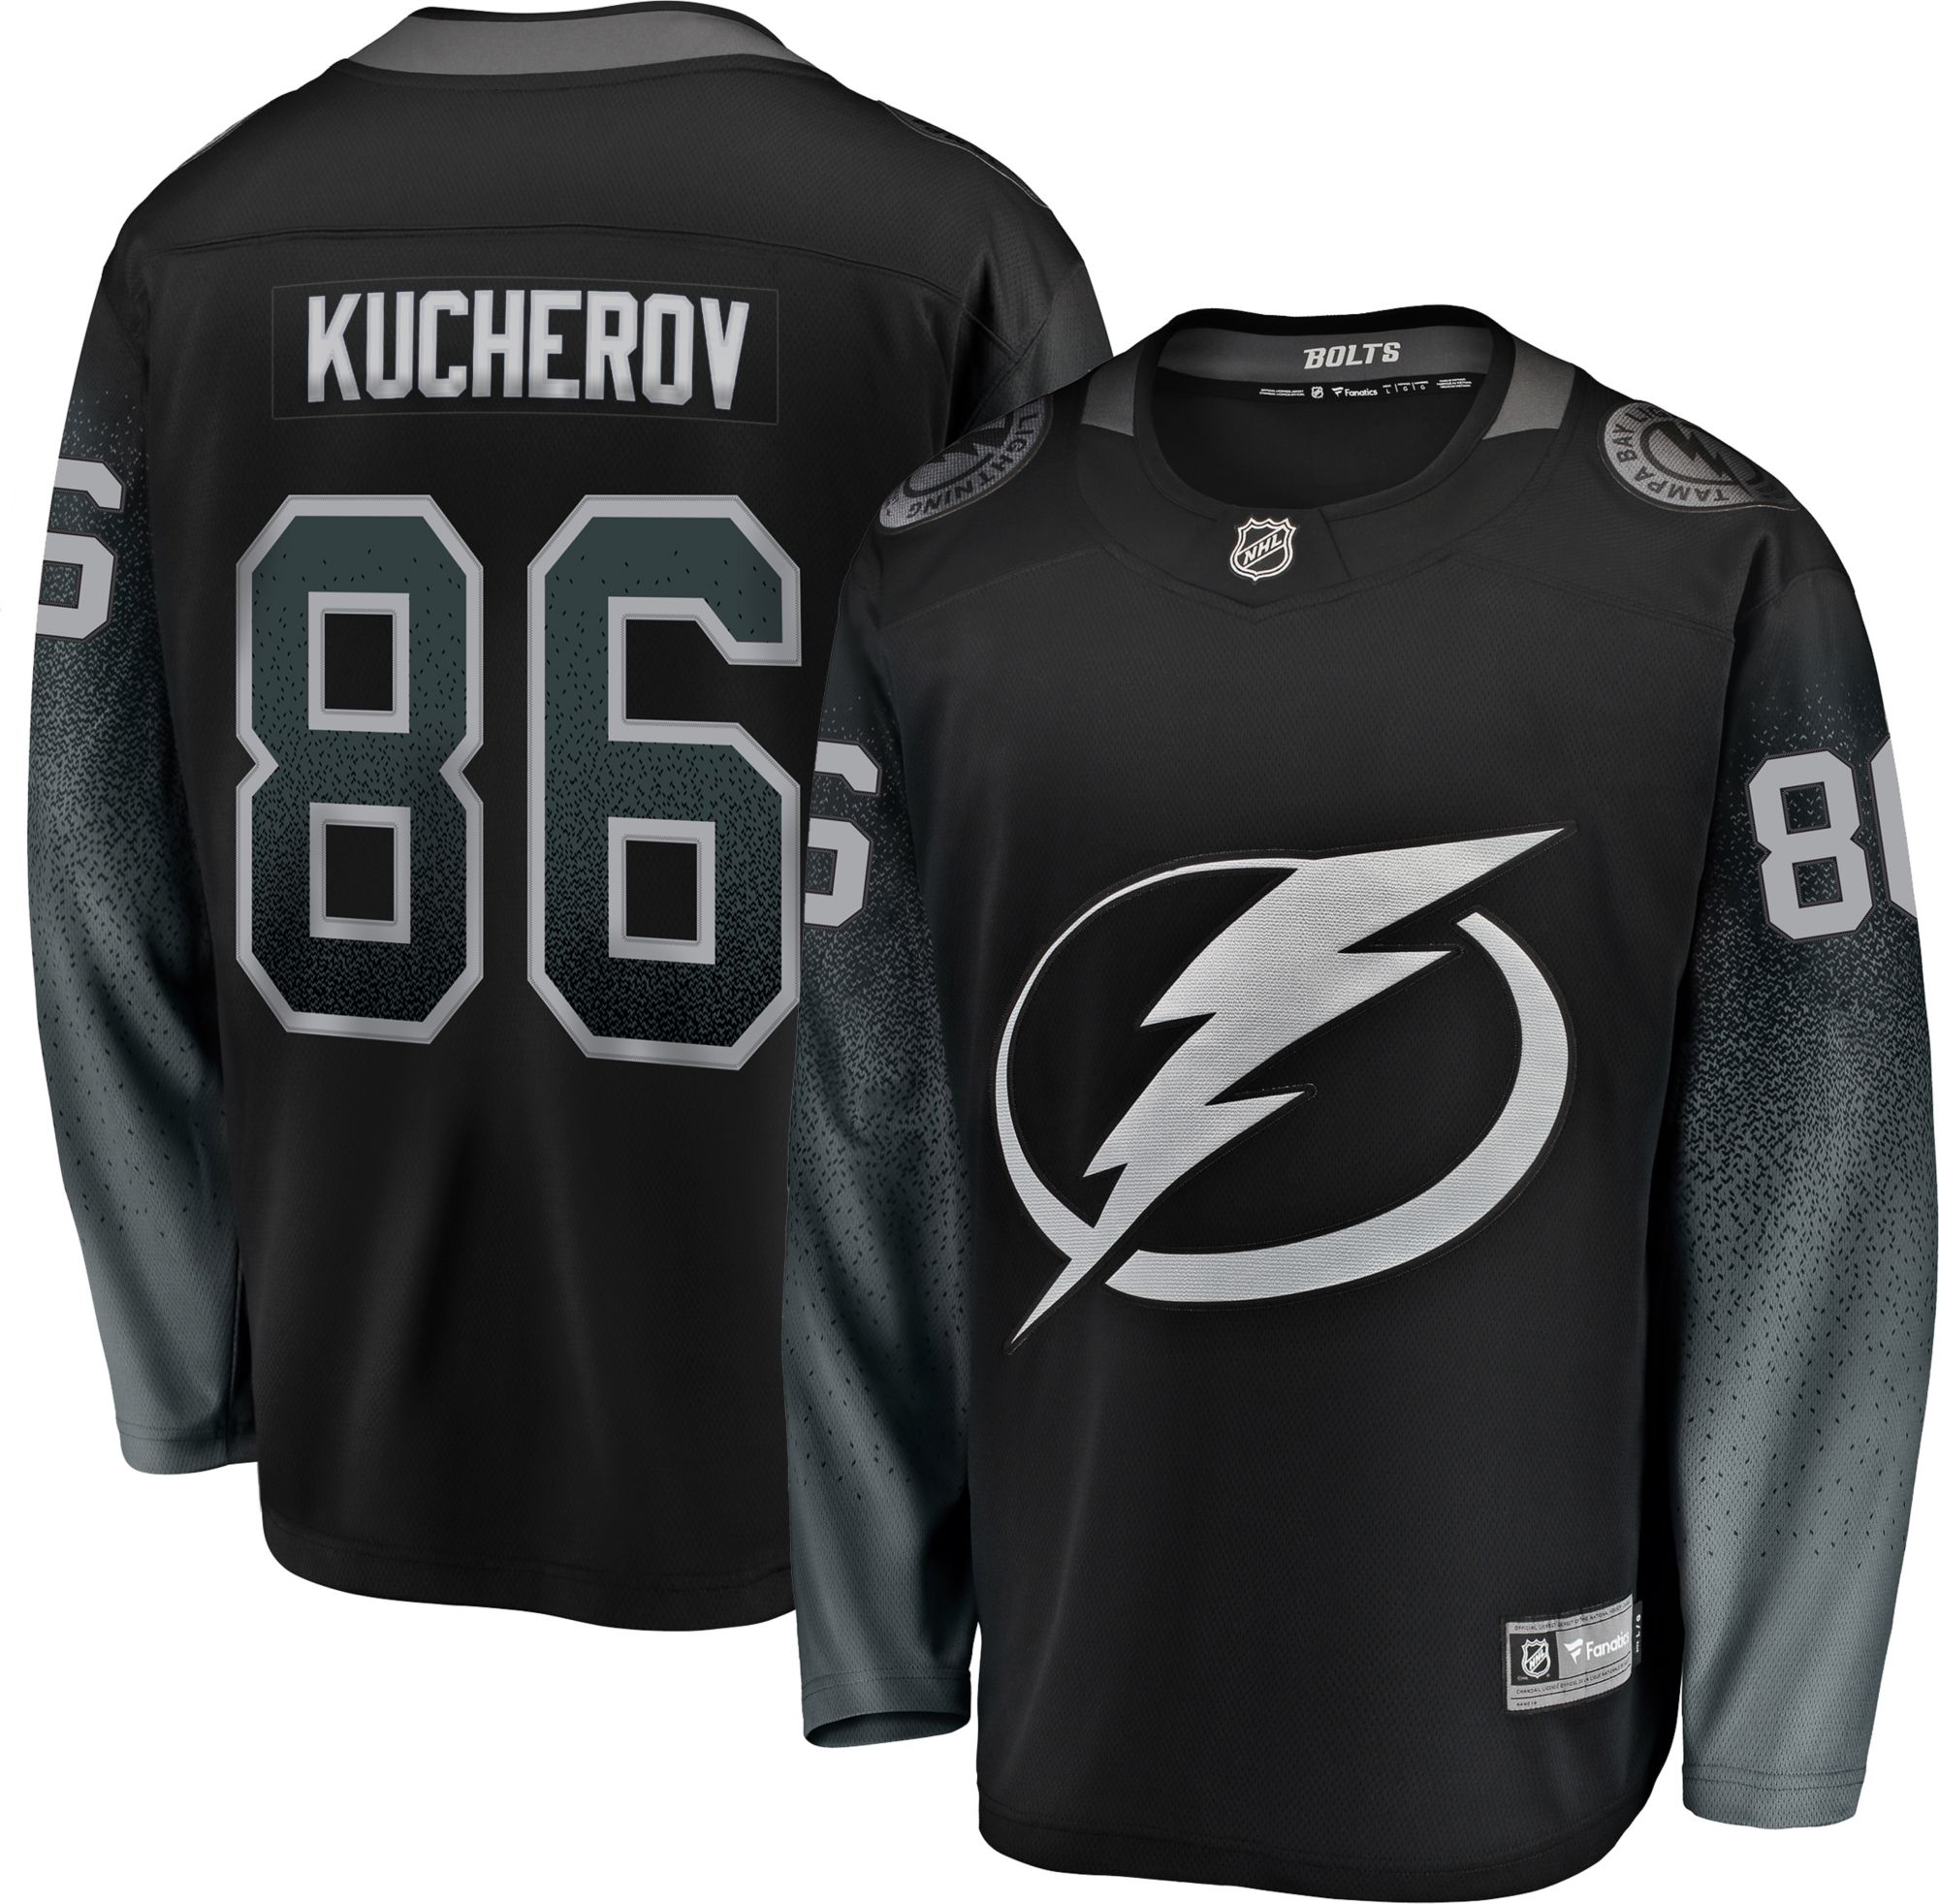 tampa bolts jersey